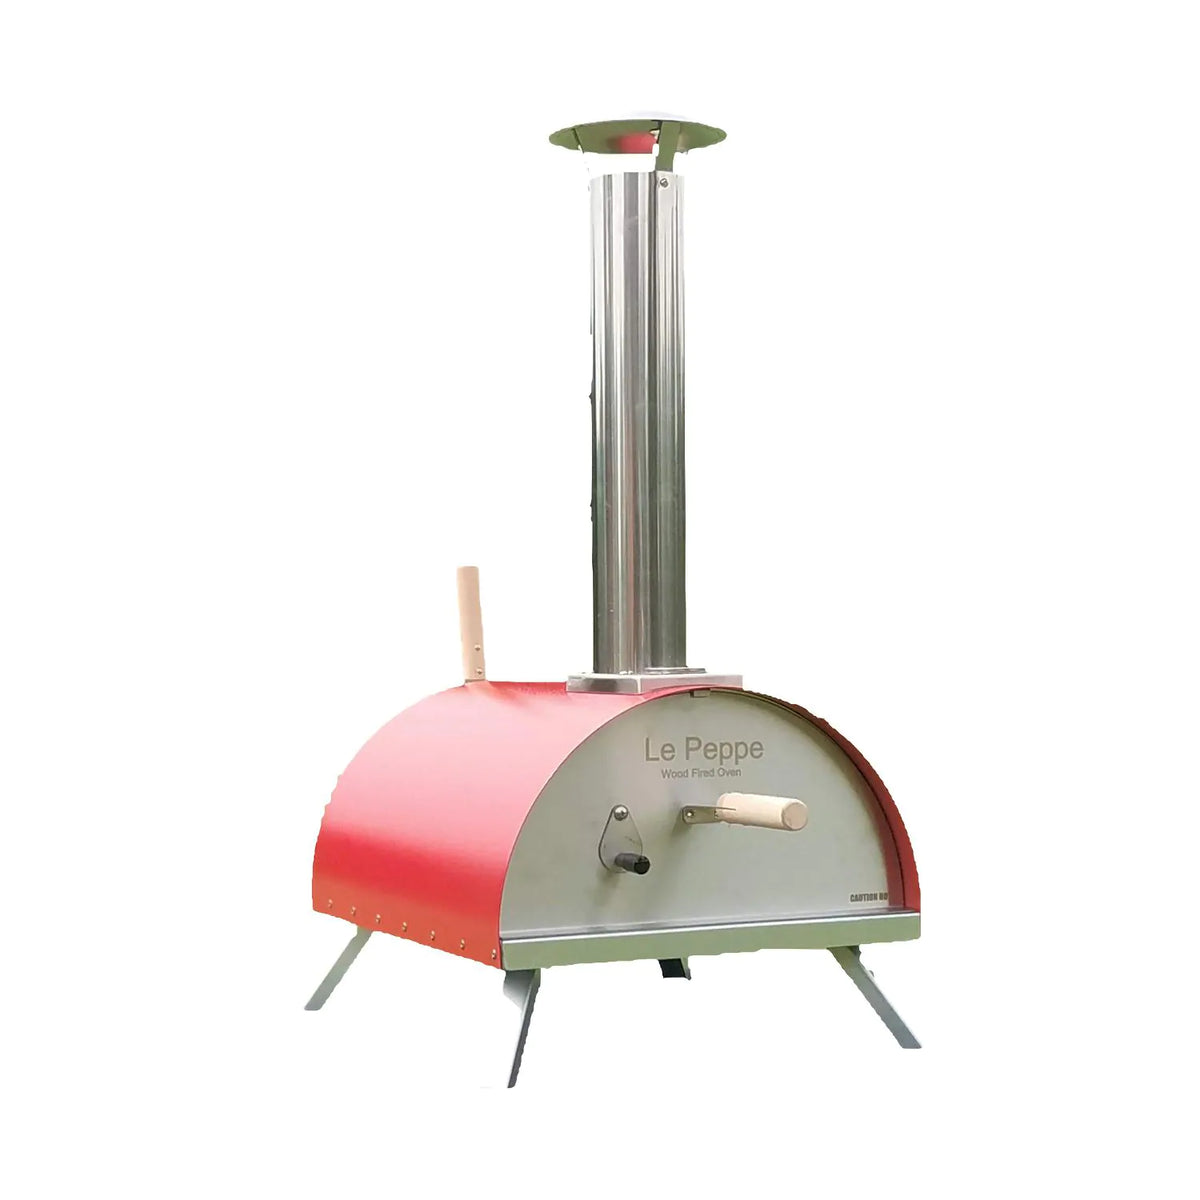 WPPO Le Peppe Portable Wood Fired Pizza Oven in Red Color